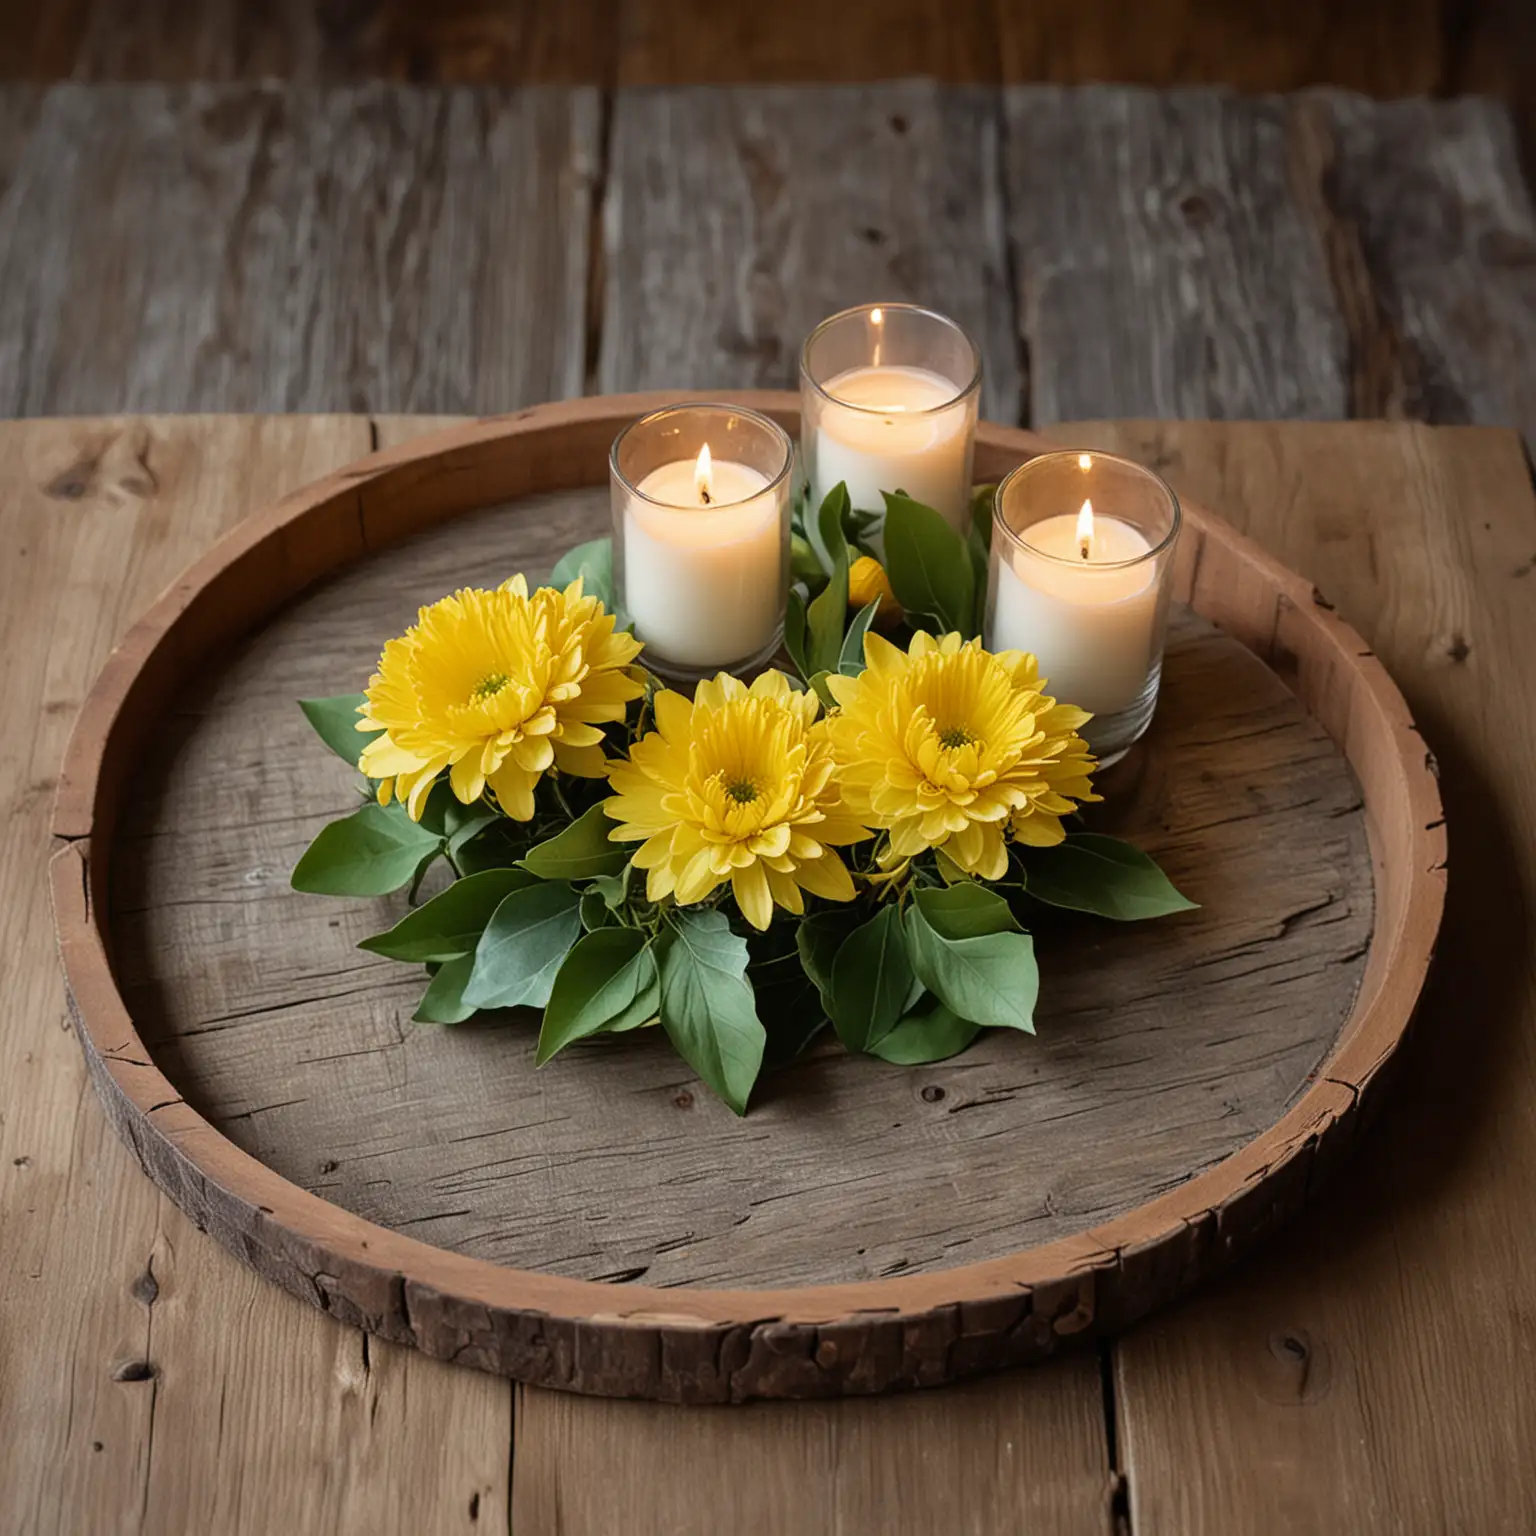 Rustic-Wedding-Table-Decor-Lemon-and-Candle-Centerpiece-with-Yellow-Flowers